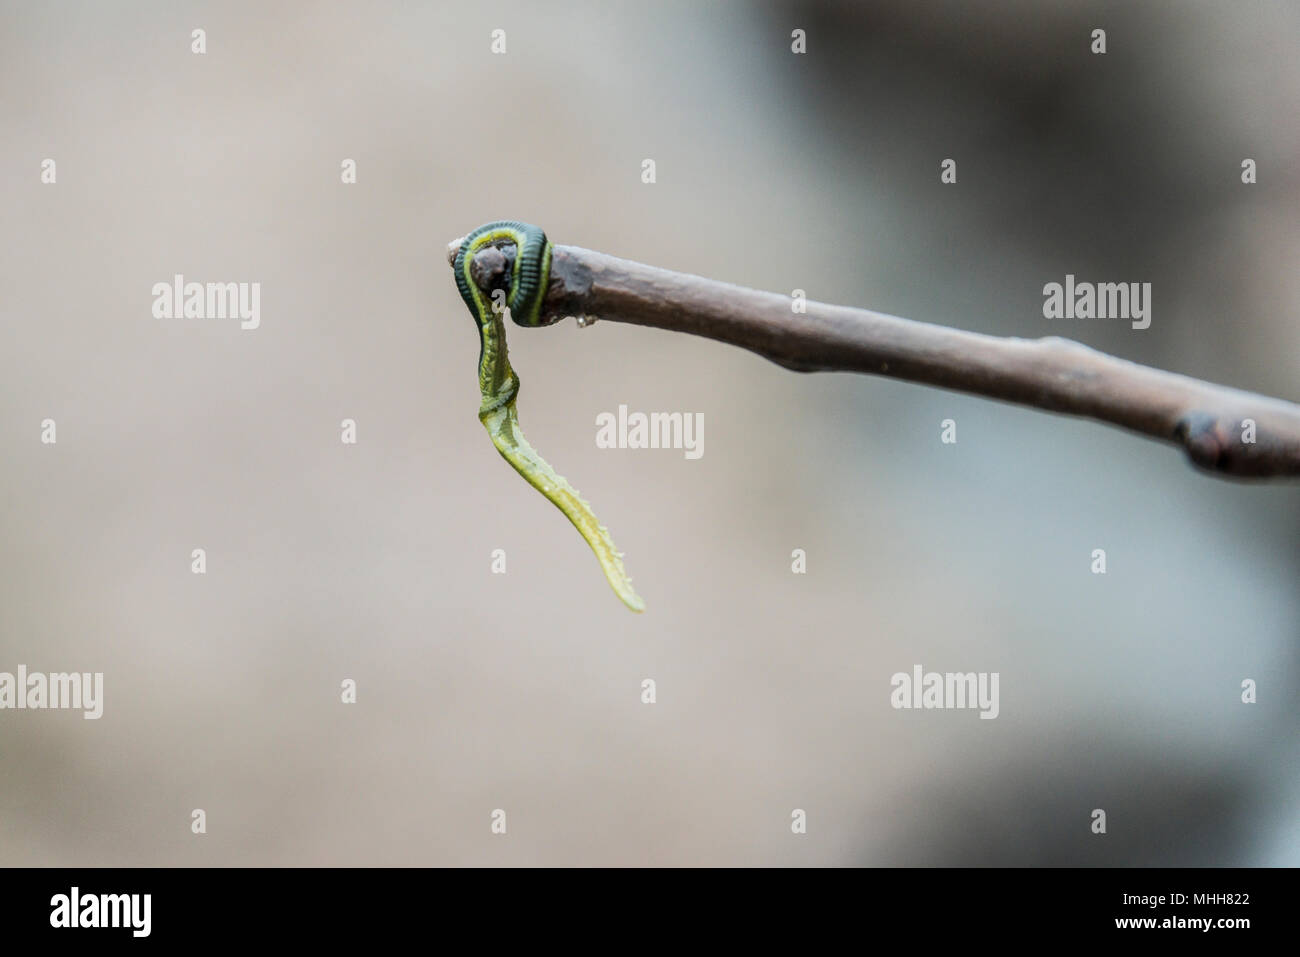 A green-leaf worm (Eulalia viridis) on the end of a stick Stock Photo